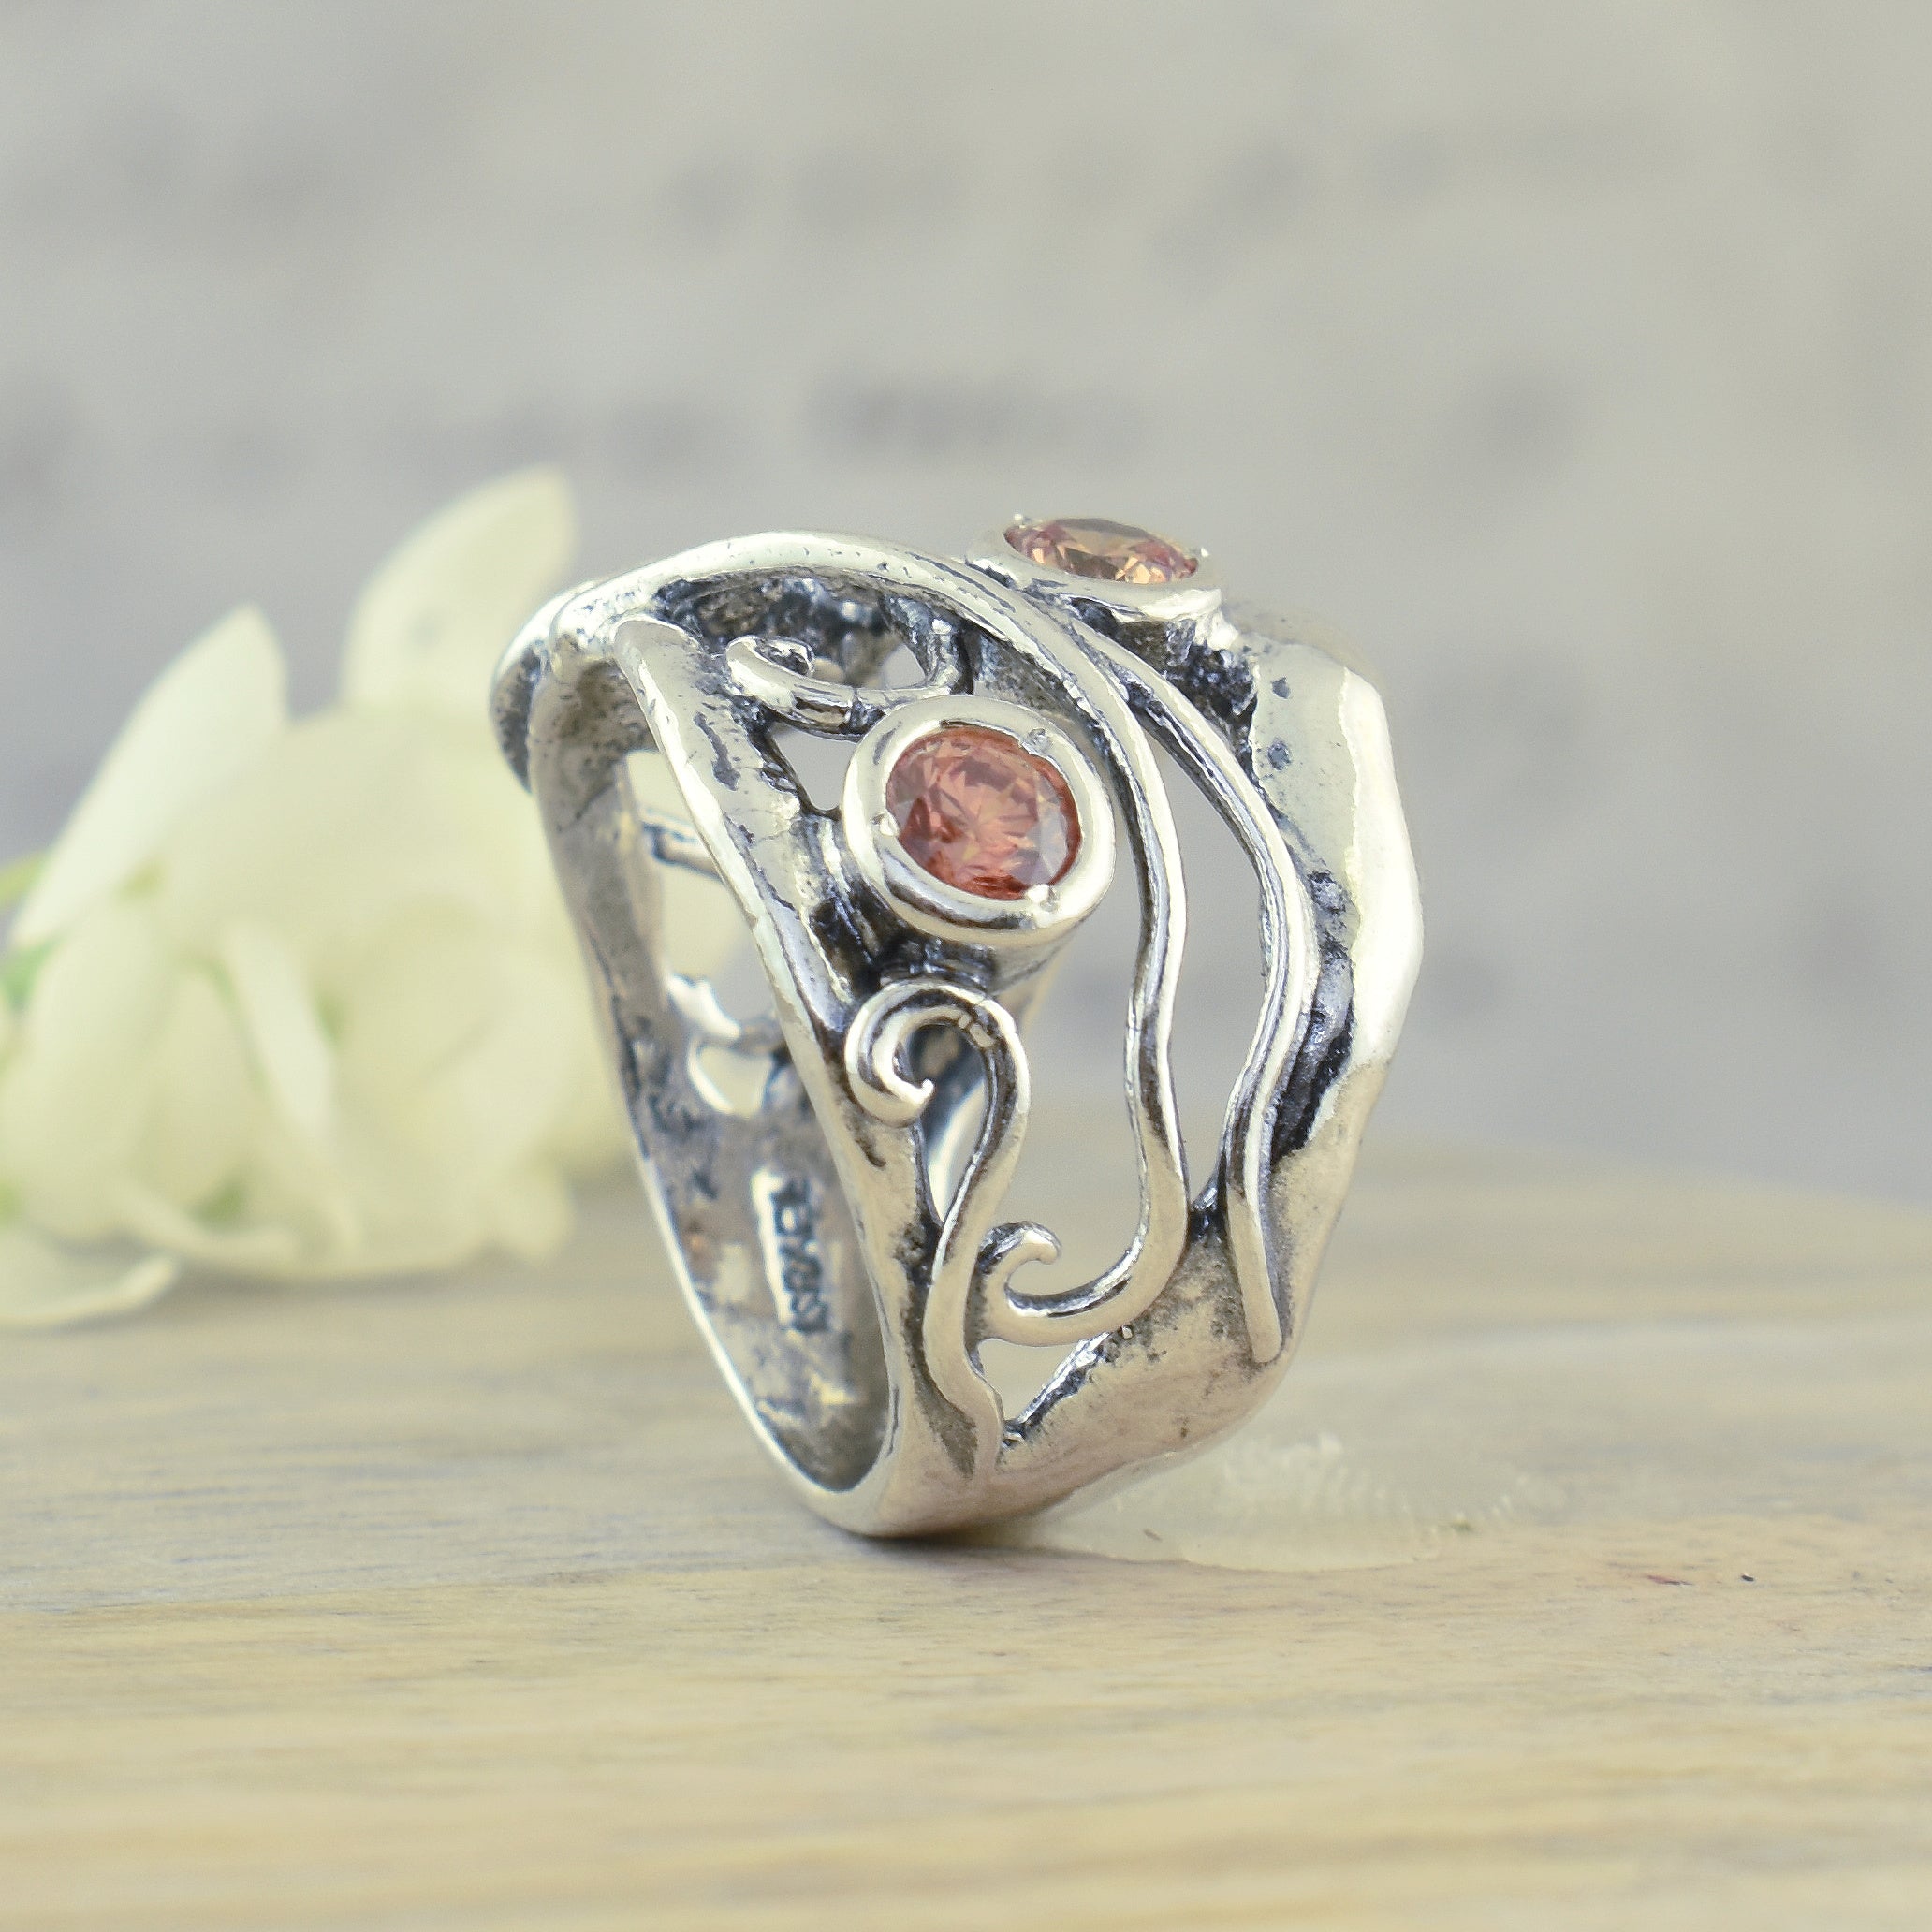 Oxidized sterling silver swirl ring with cz